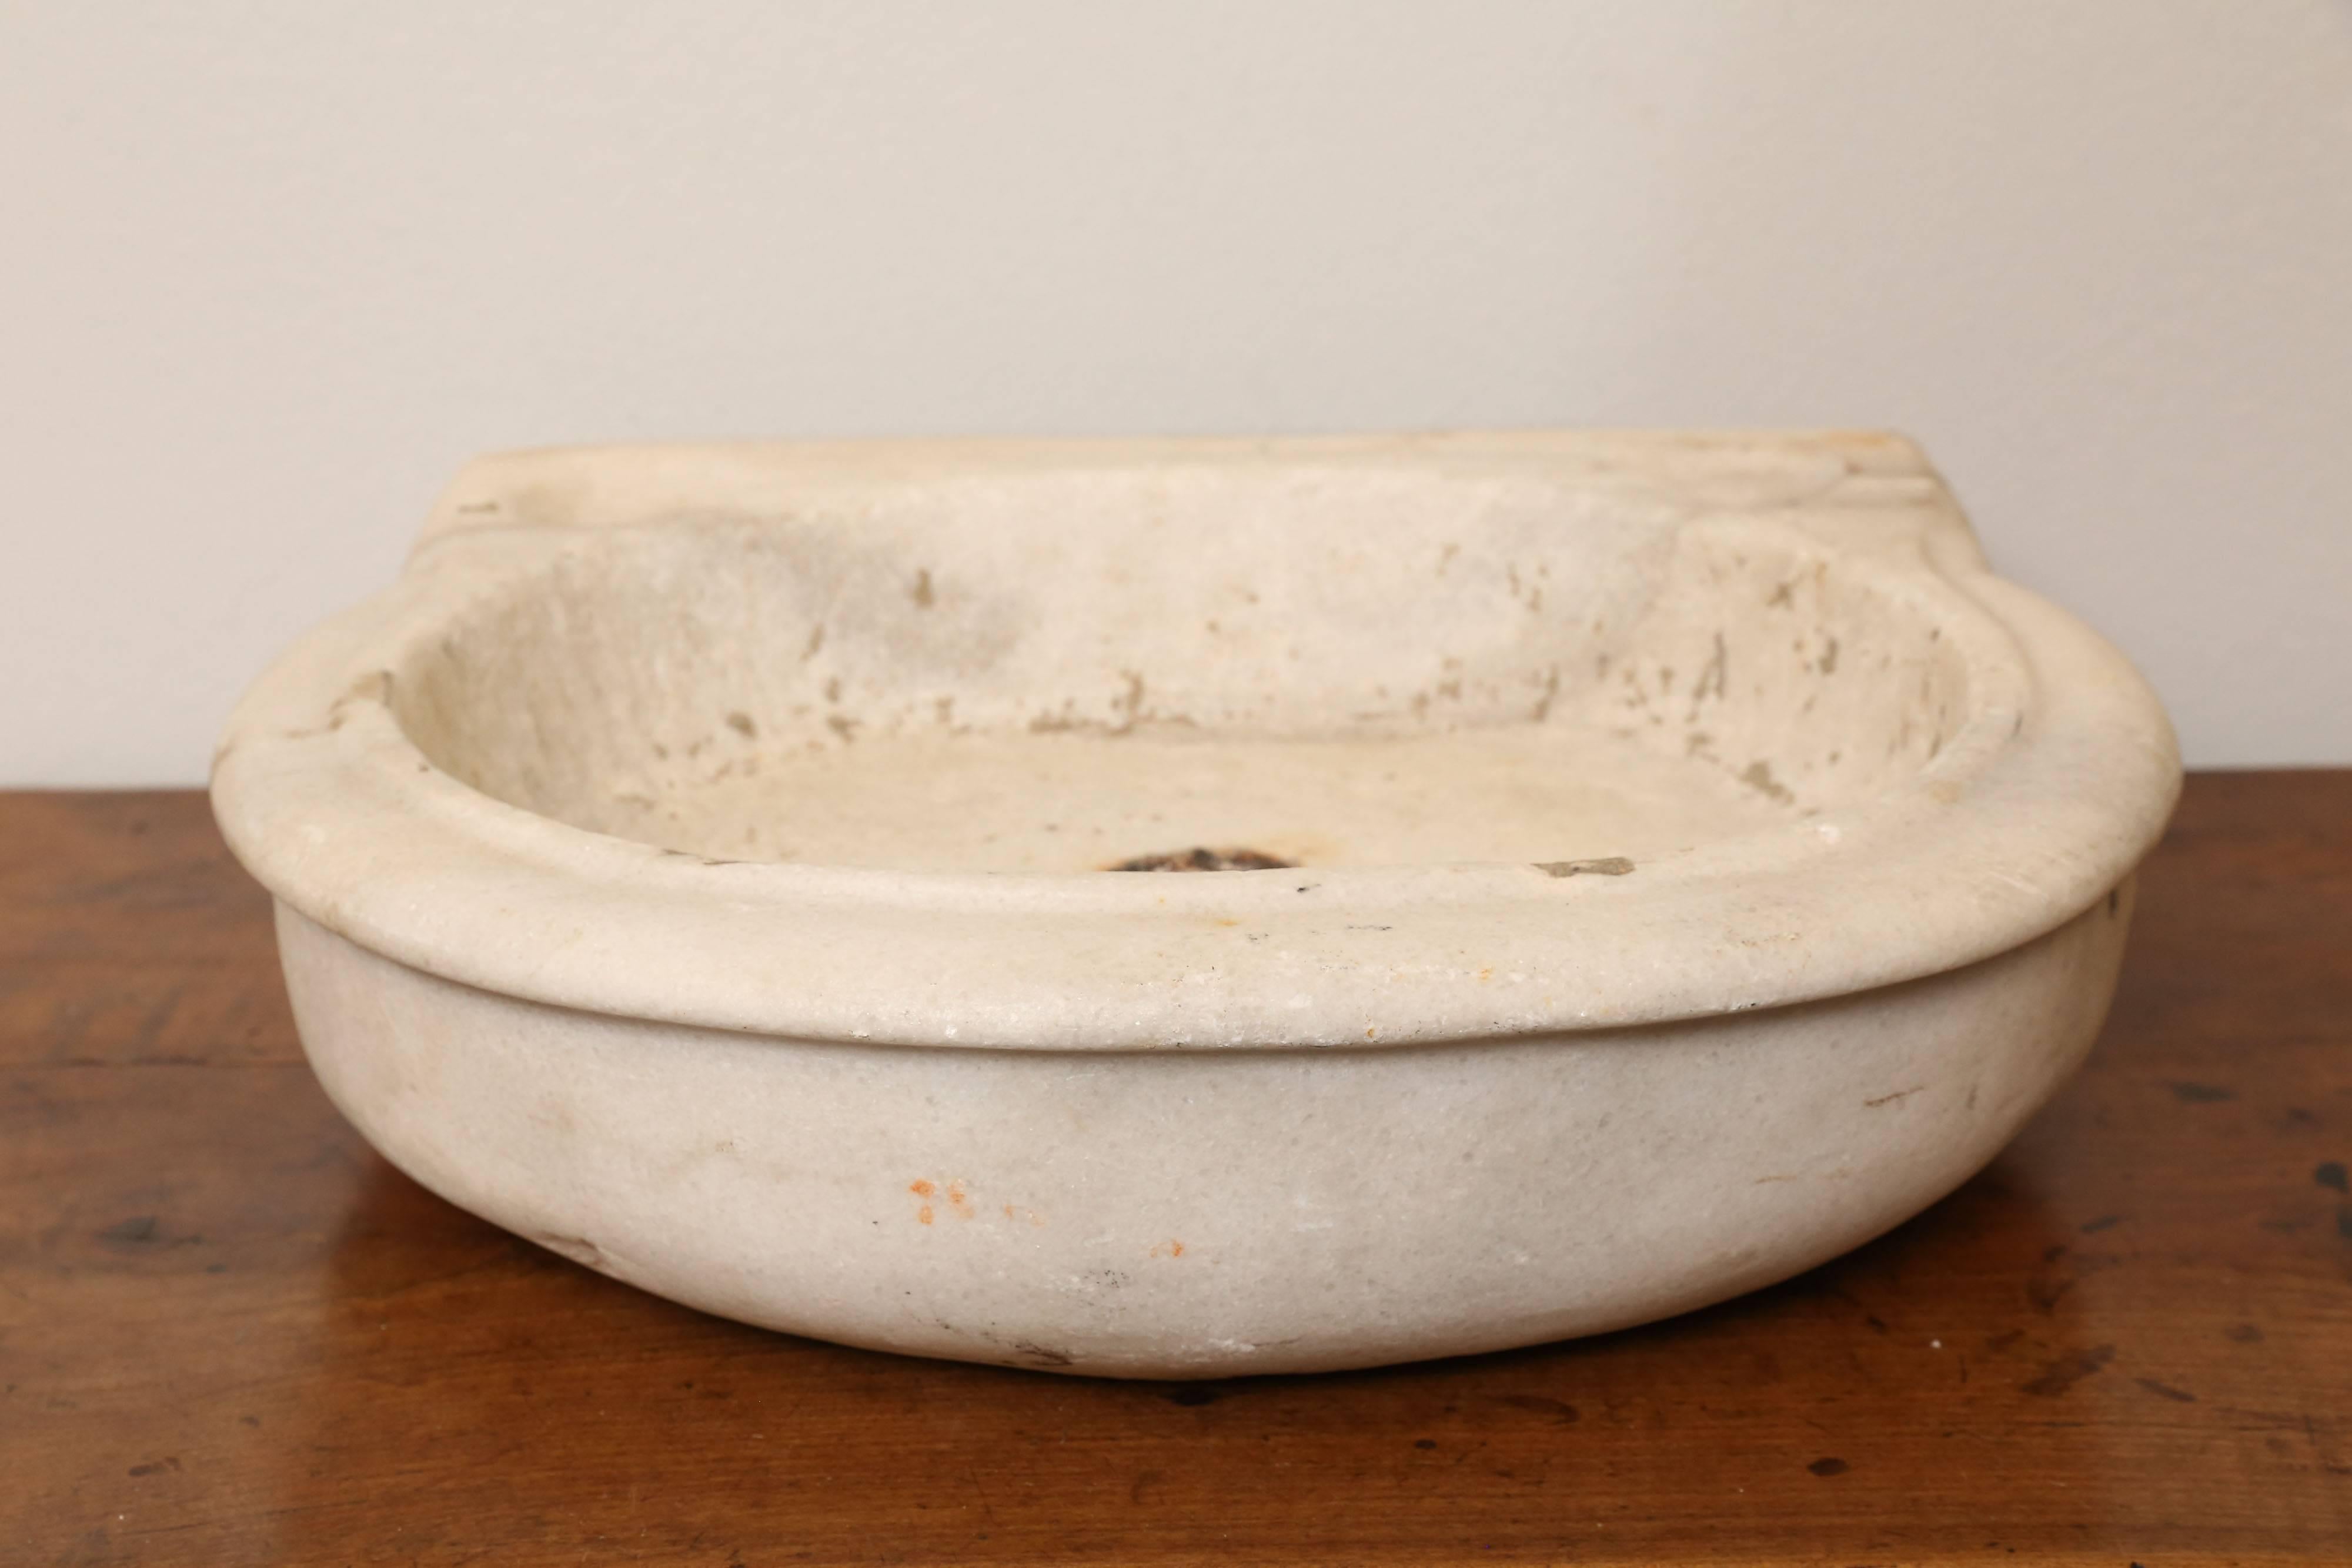 19th century marble sink. Bowl size 13.25' x 10